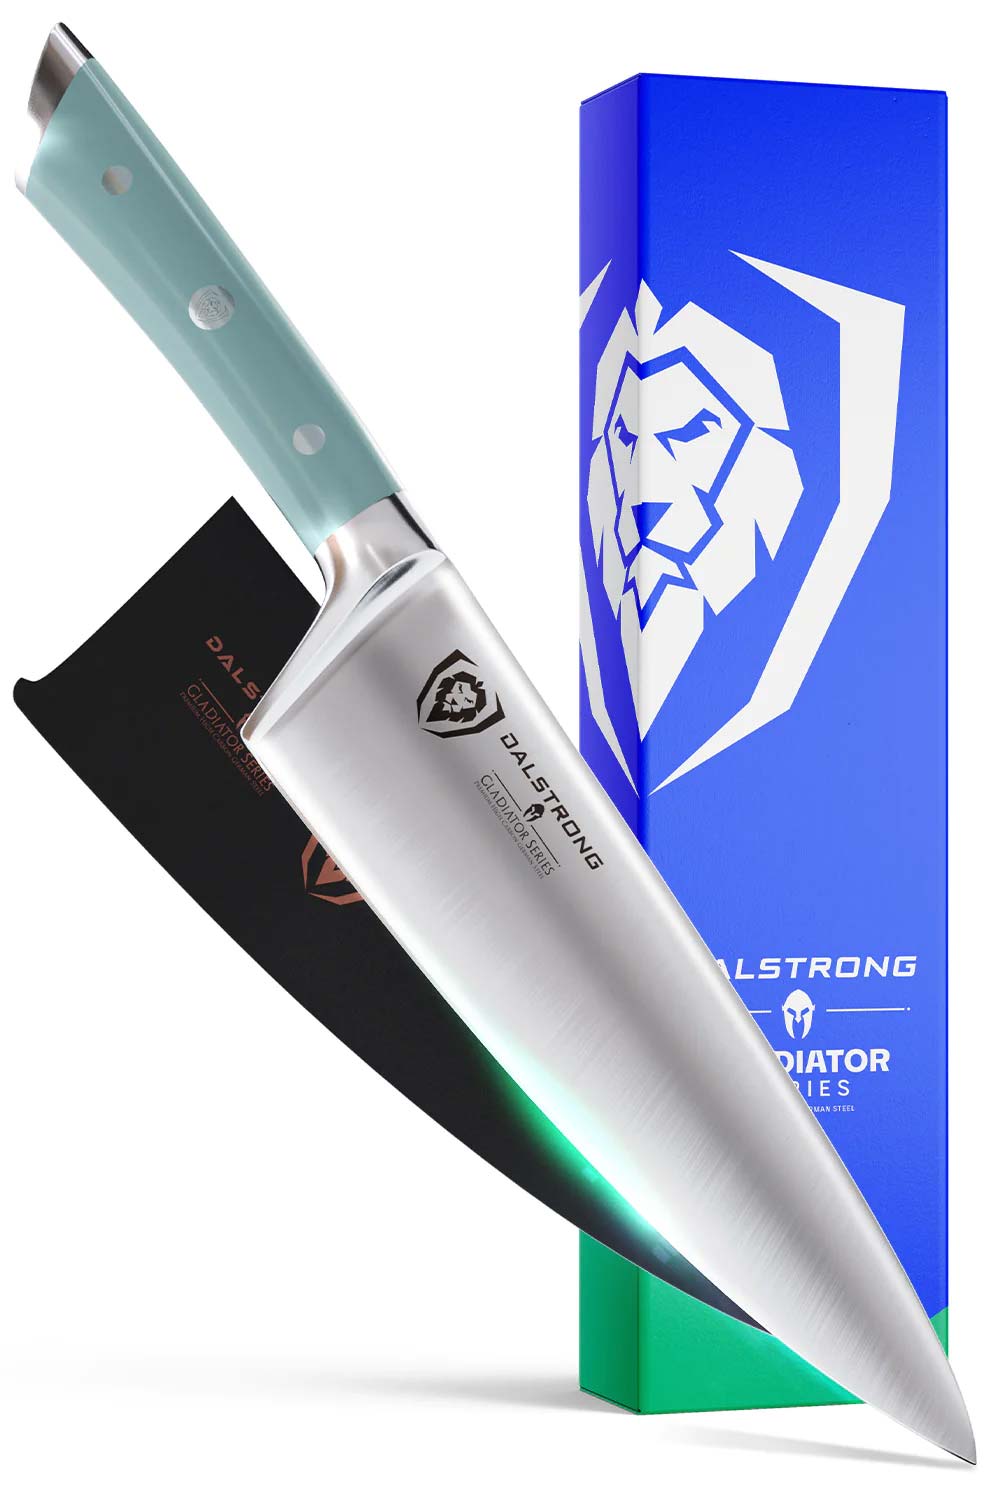 Dalstrong gladiator series 8 inch chef knife with aegean teal handle in front of it's premium packaging.